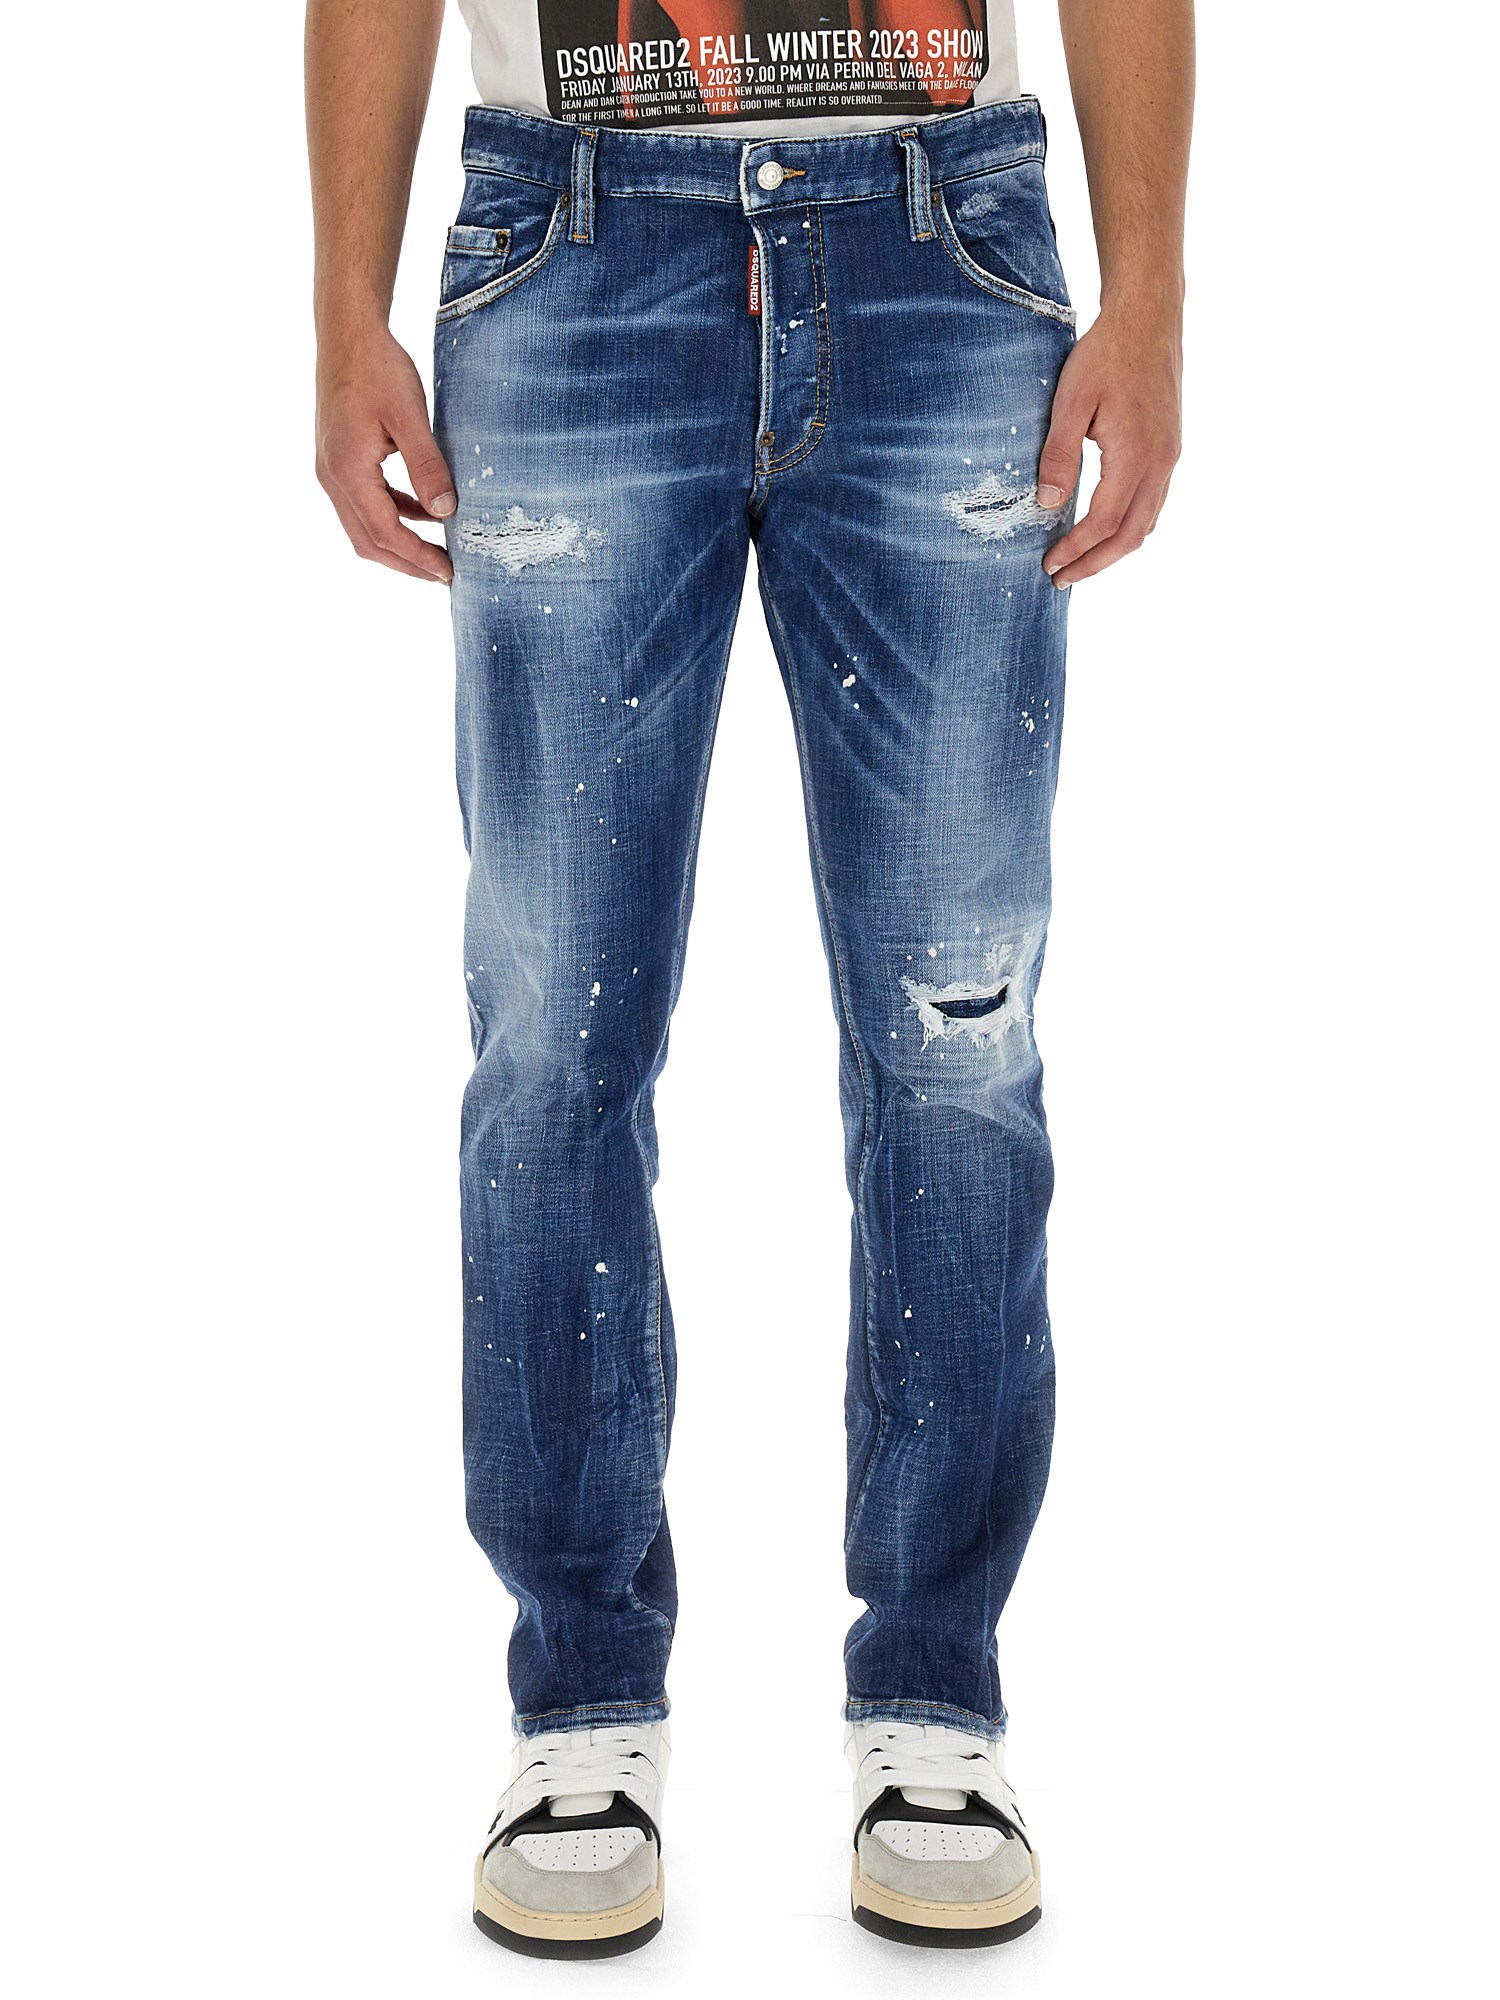 dsquared patent leather effect jeans